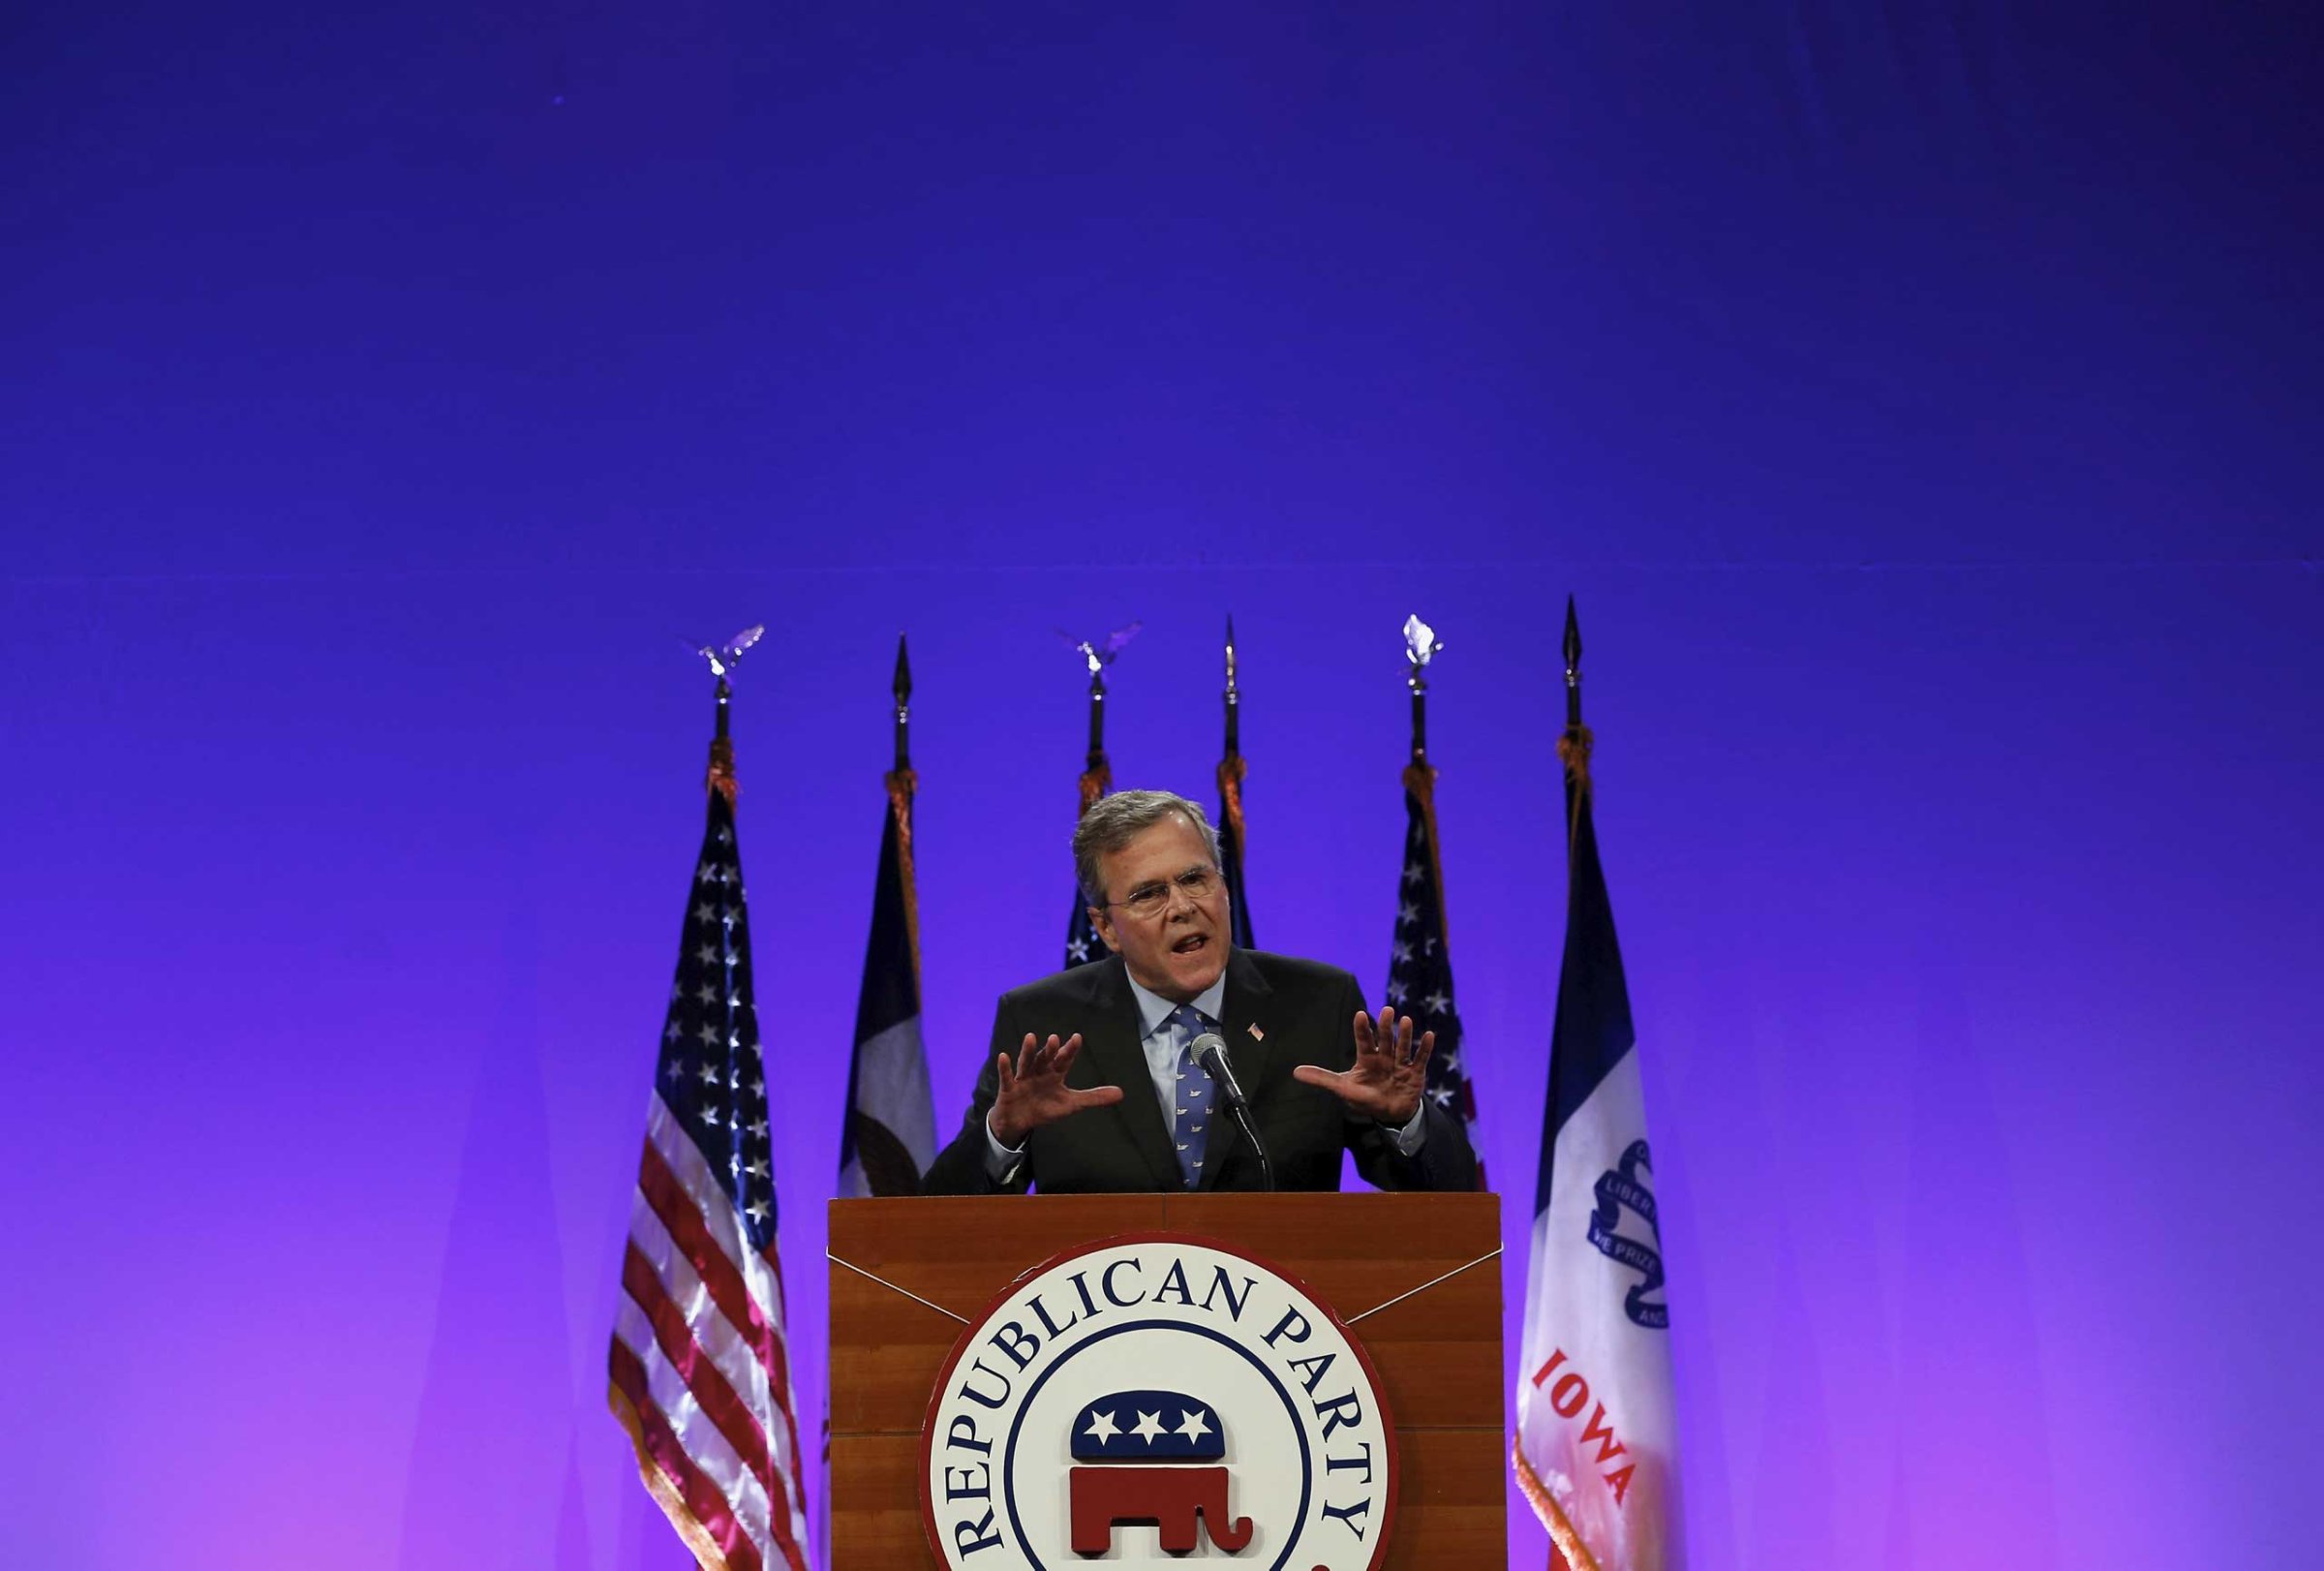 Former Florida Governor Jeb Bush speaks at the Republican Party of Iowa's Lincoln Dinner in Des Moines, Iowa, United States, May 16, 2015.